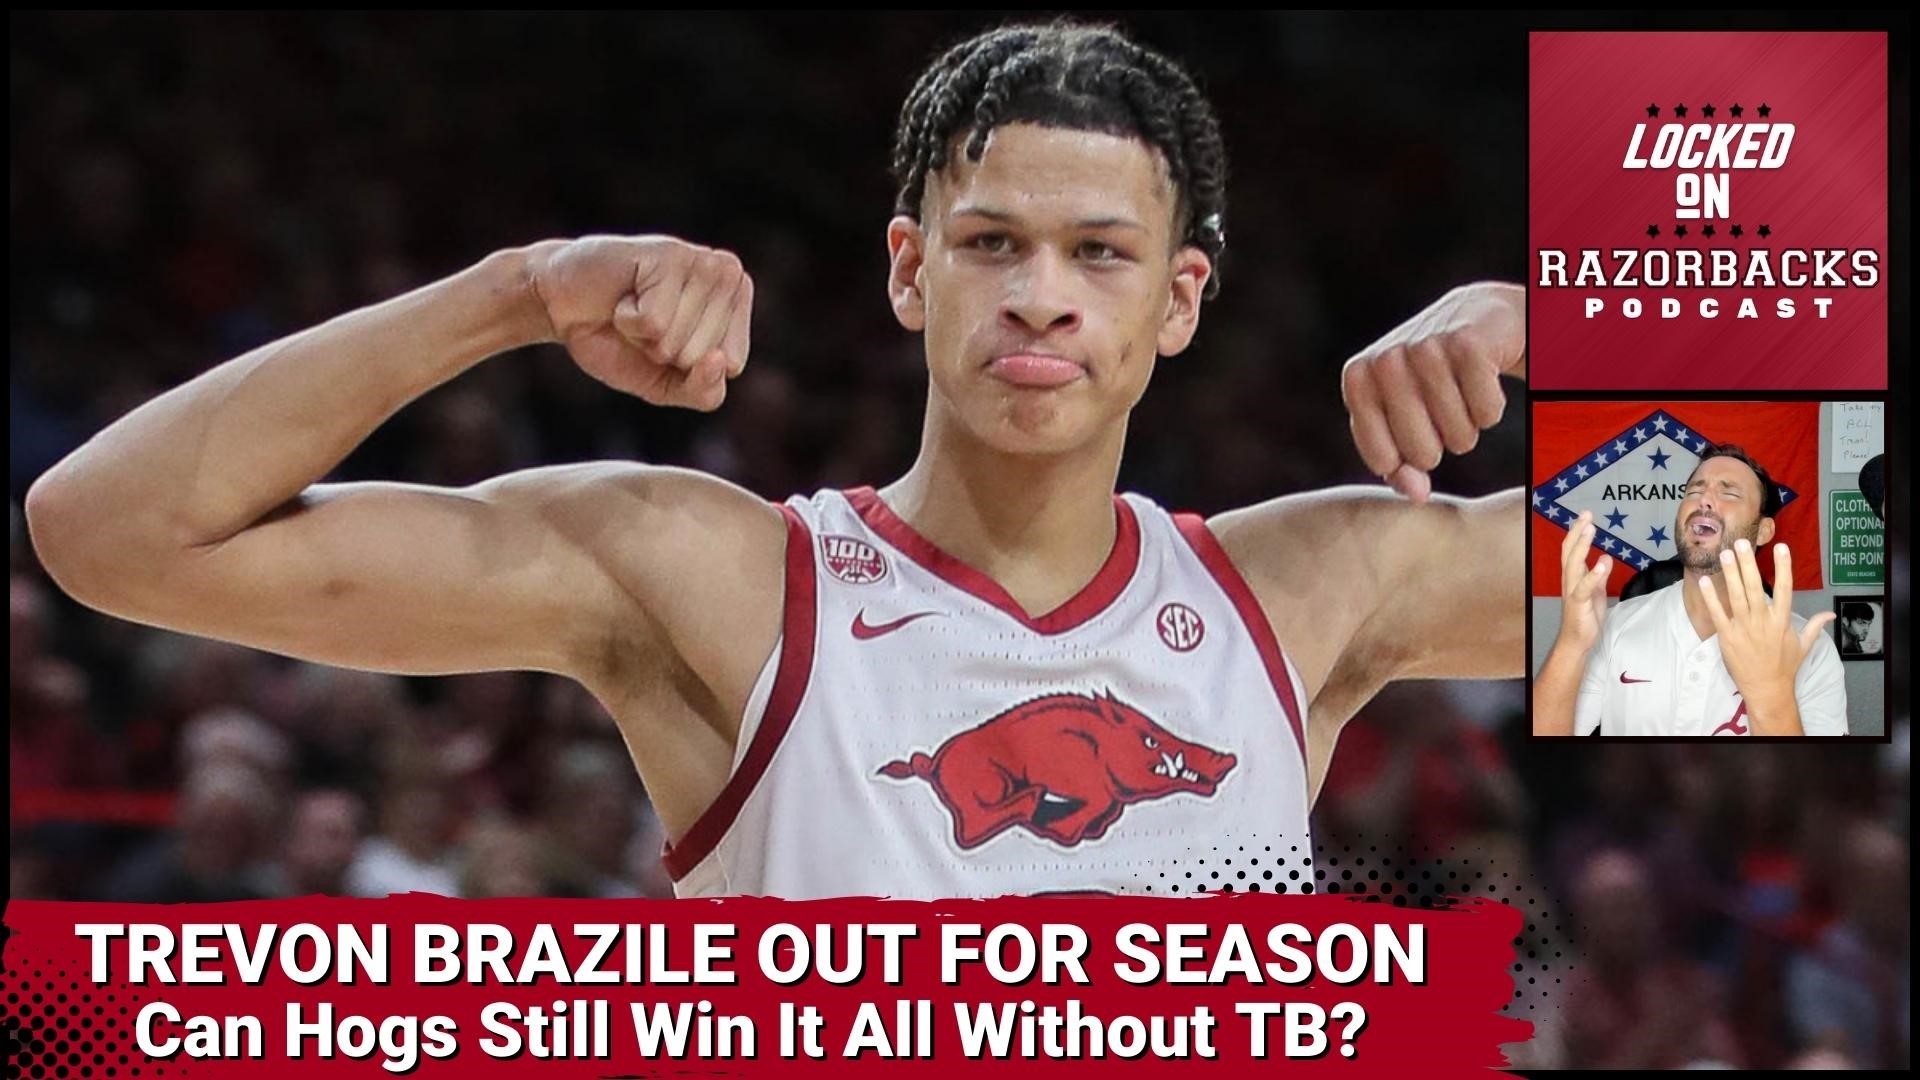 John Nabors reacts to the news of Razorback forward Trevon Brazile being out for the season with a torn ACL and how this impacts Arkansas basketball.